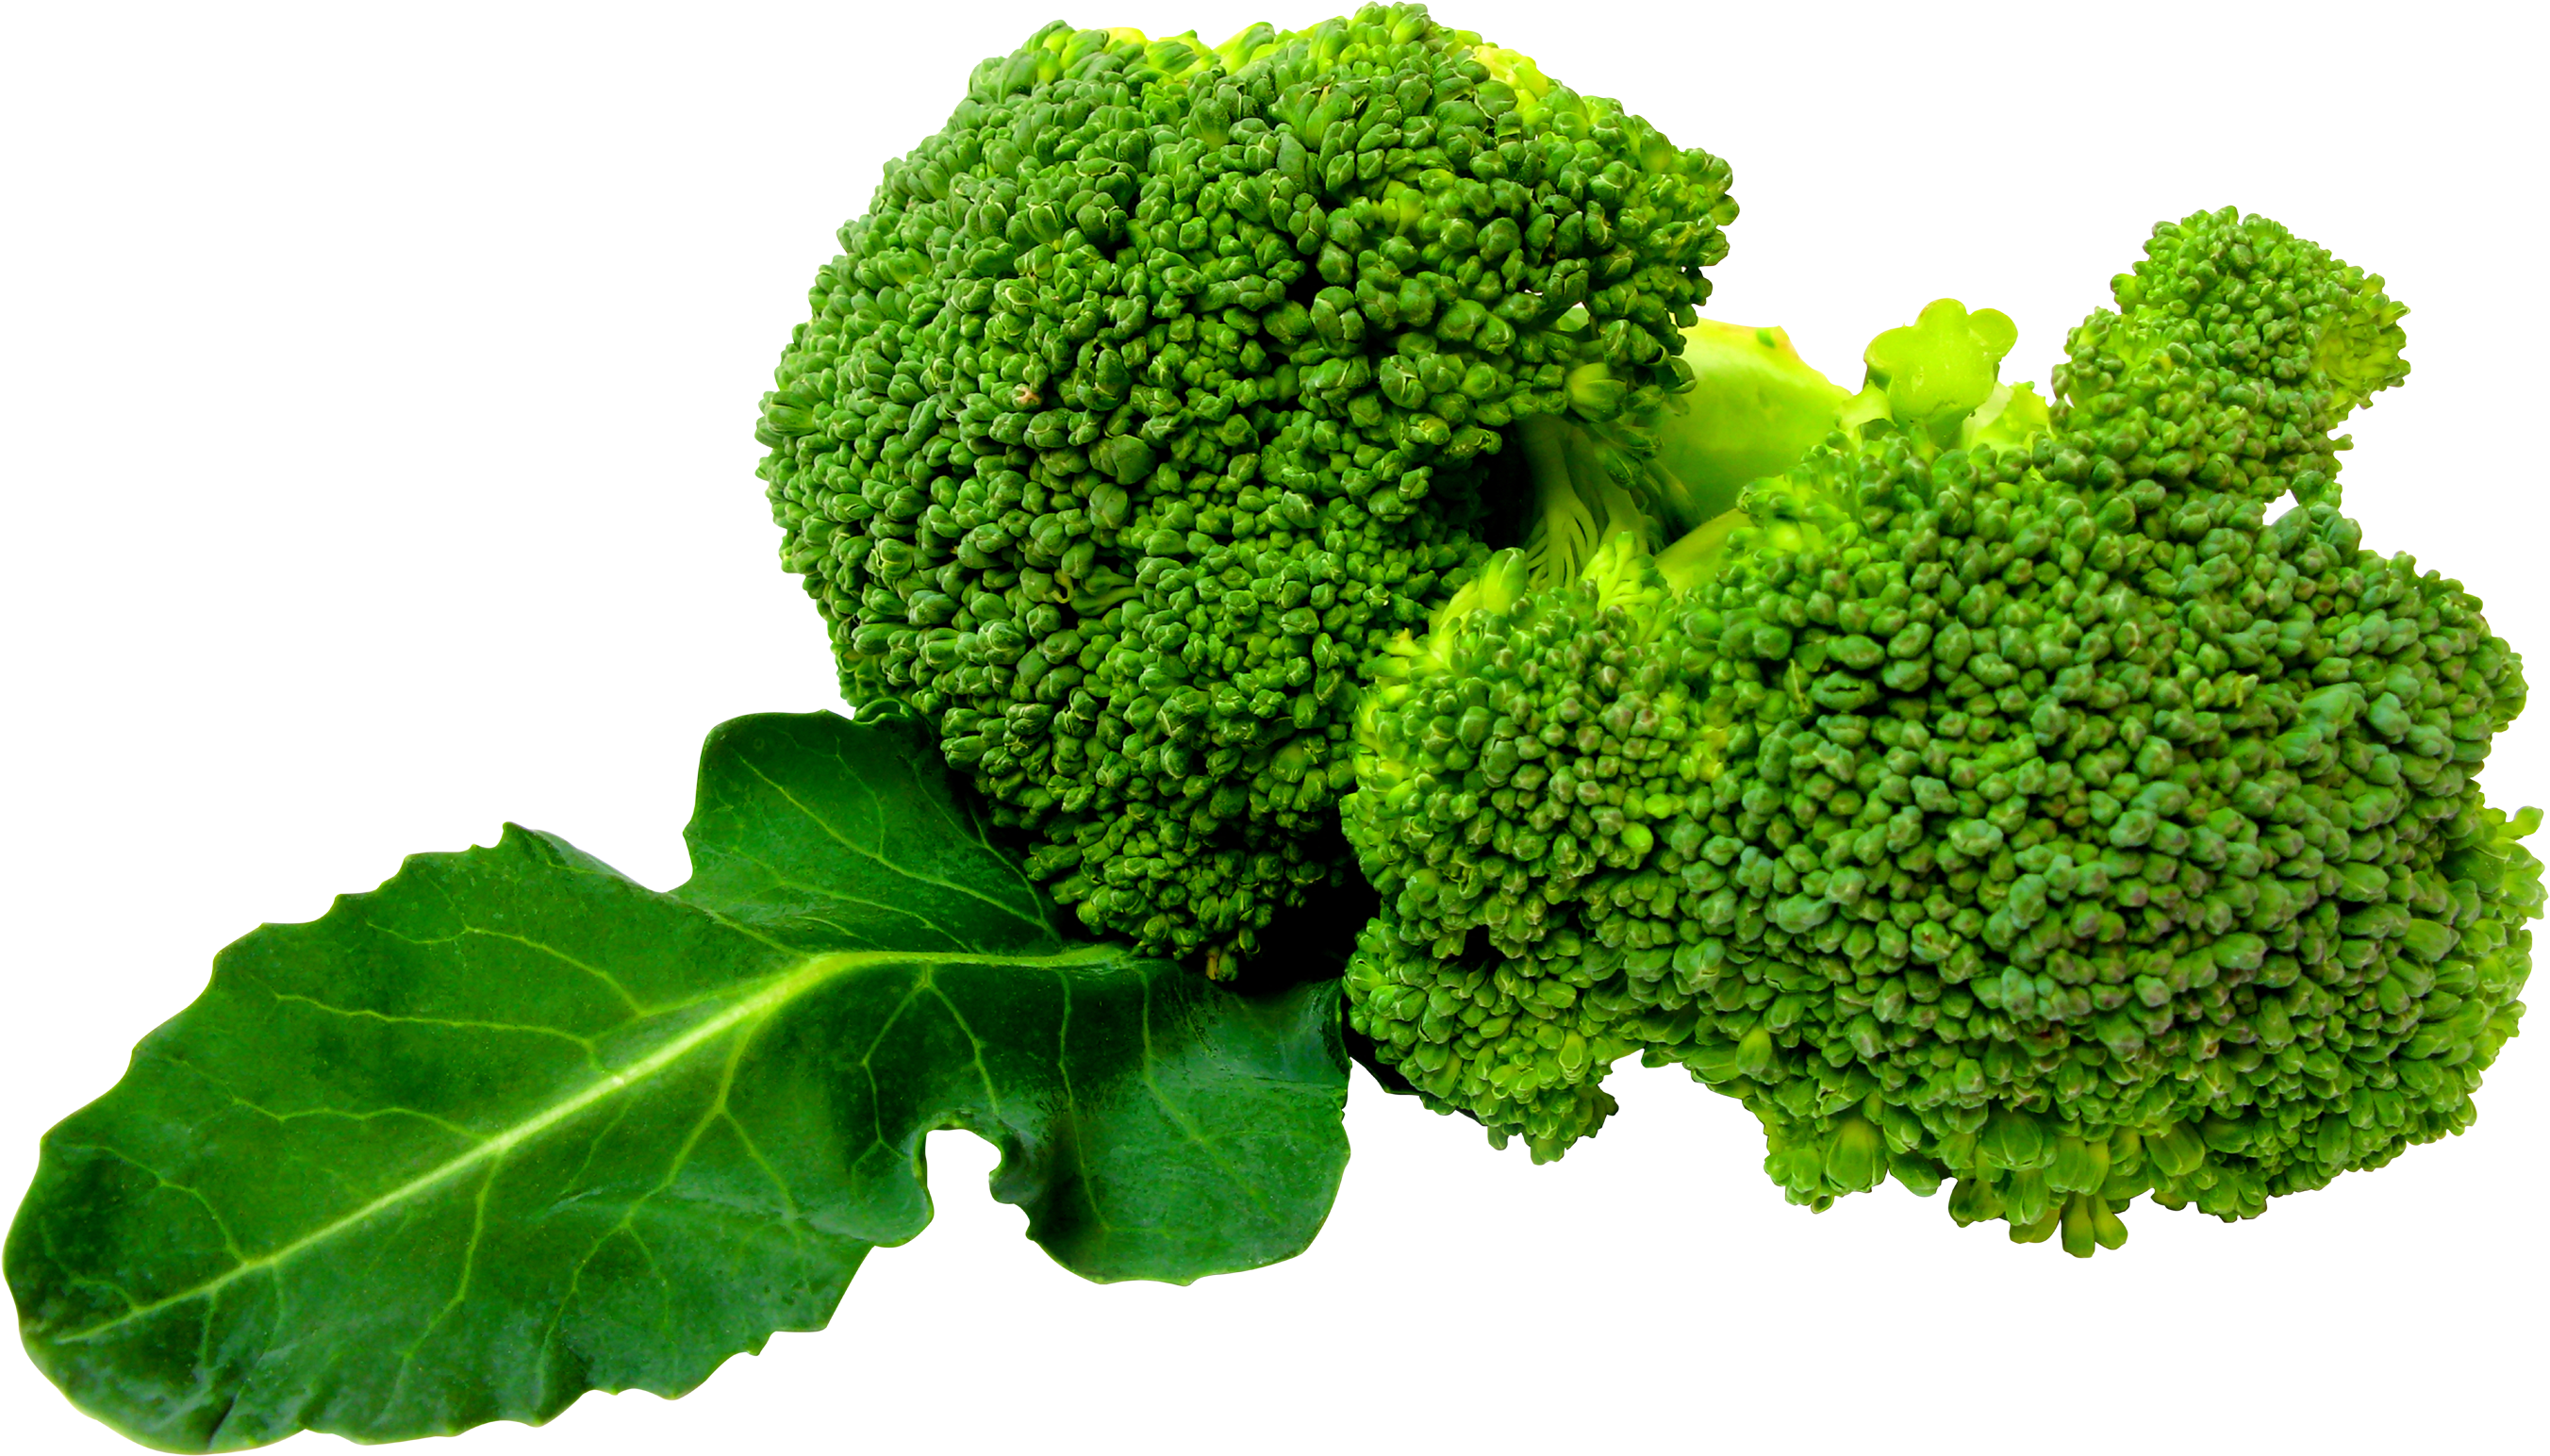 Vegetable Png